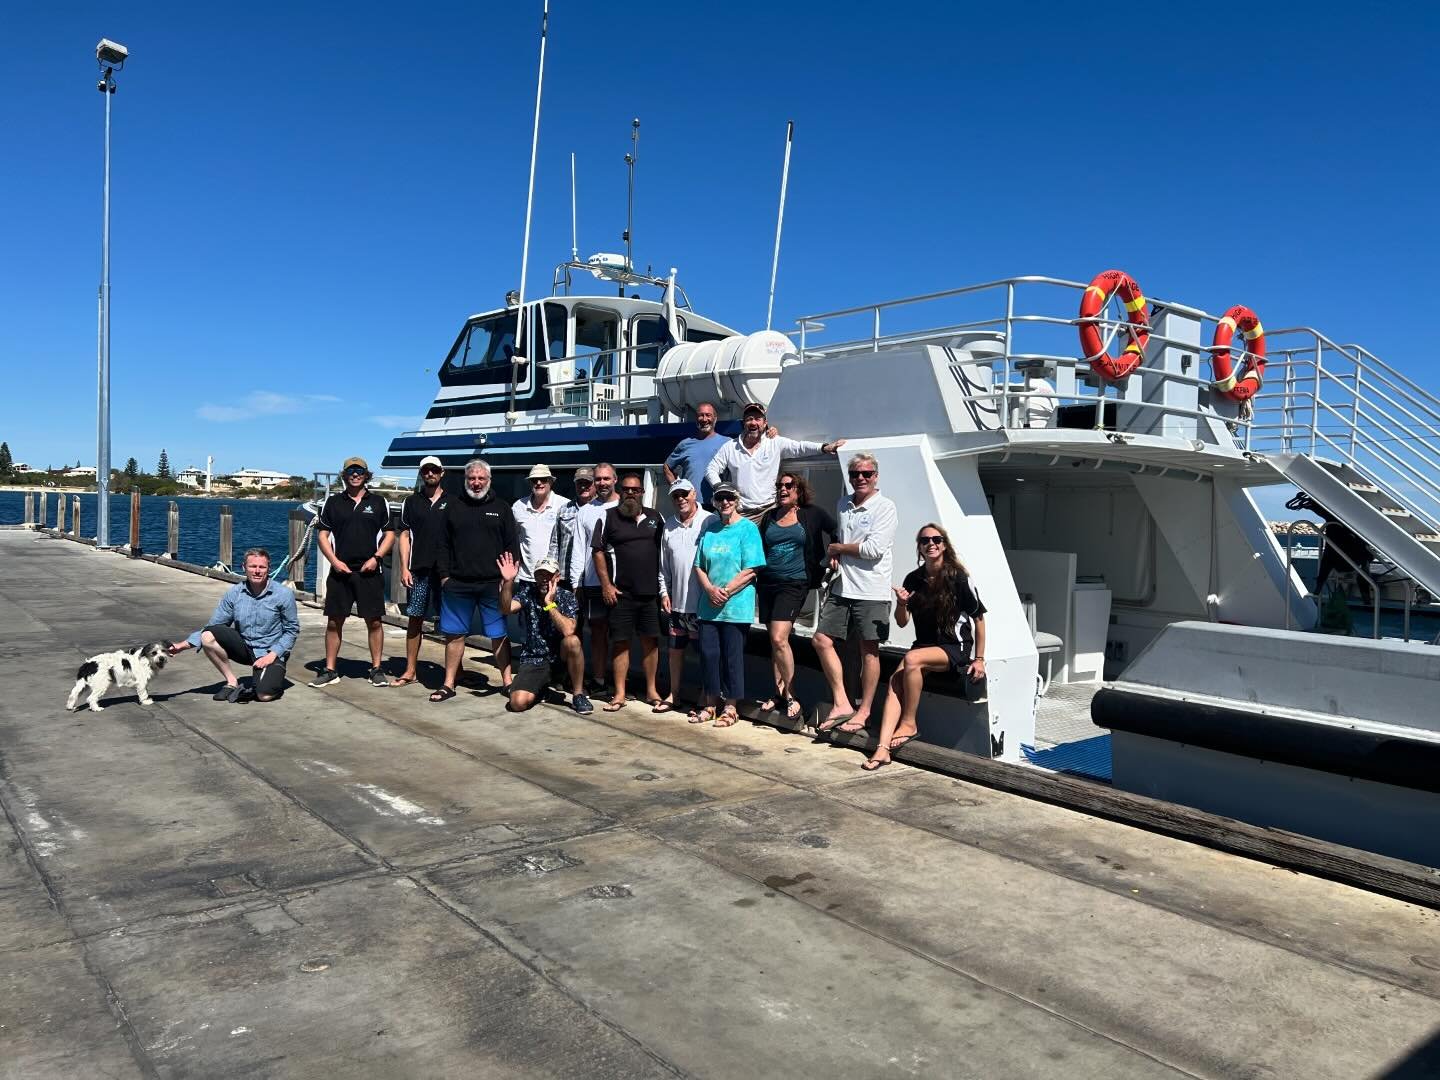 Private Scuba Dive Charters, Jurien Bay 🤿🪸

On the weekend we had the pleasure of hosting Fremantle Yacht Club for a two-day dive charter. 

Our team had an absolute blast, with perfect conditions! 🛥️

April/May is a great time to book your dive c